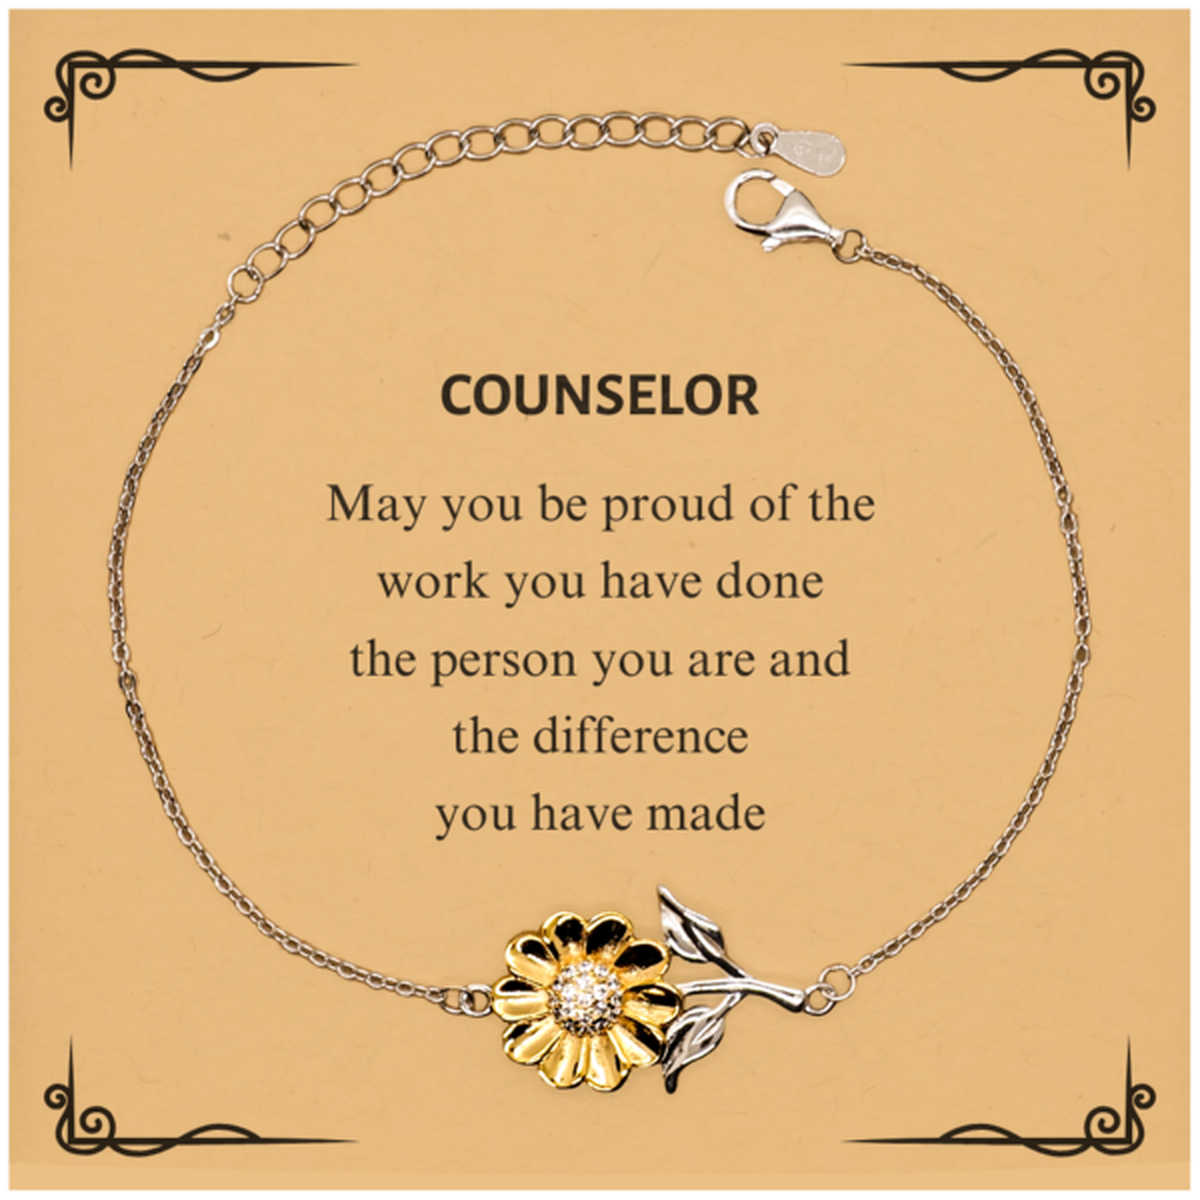 Counselor May you be proud of the work you have done, Retirement Counselor Sunflower Bracelet for Colleague Appreciation Gifts Amazing for Counselor